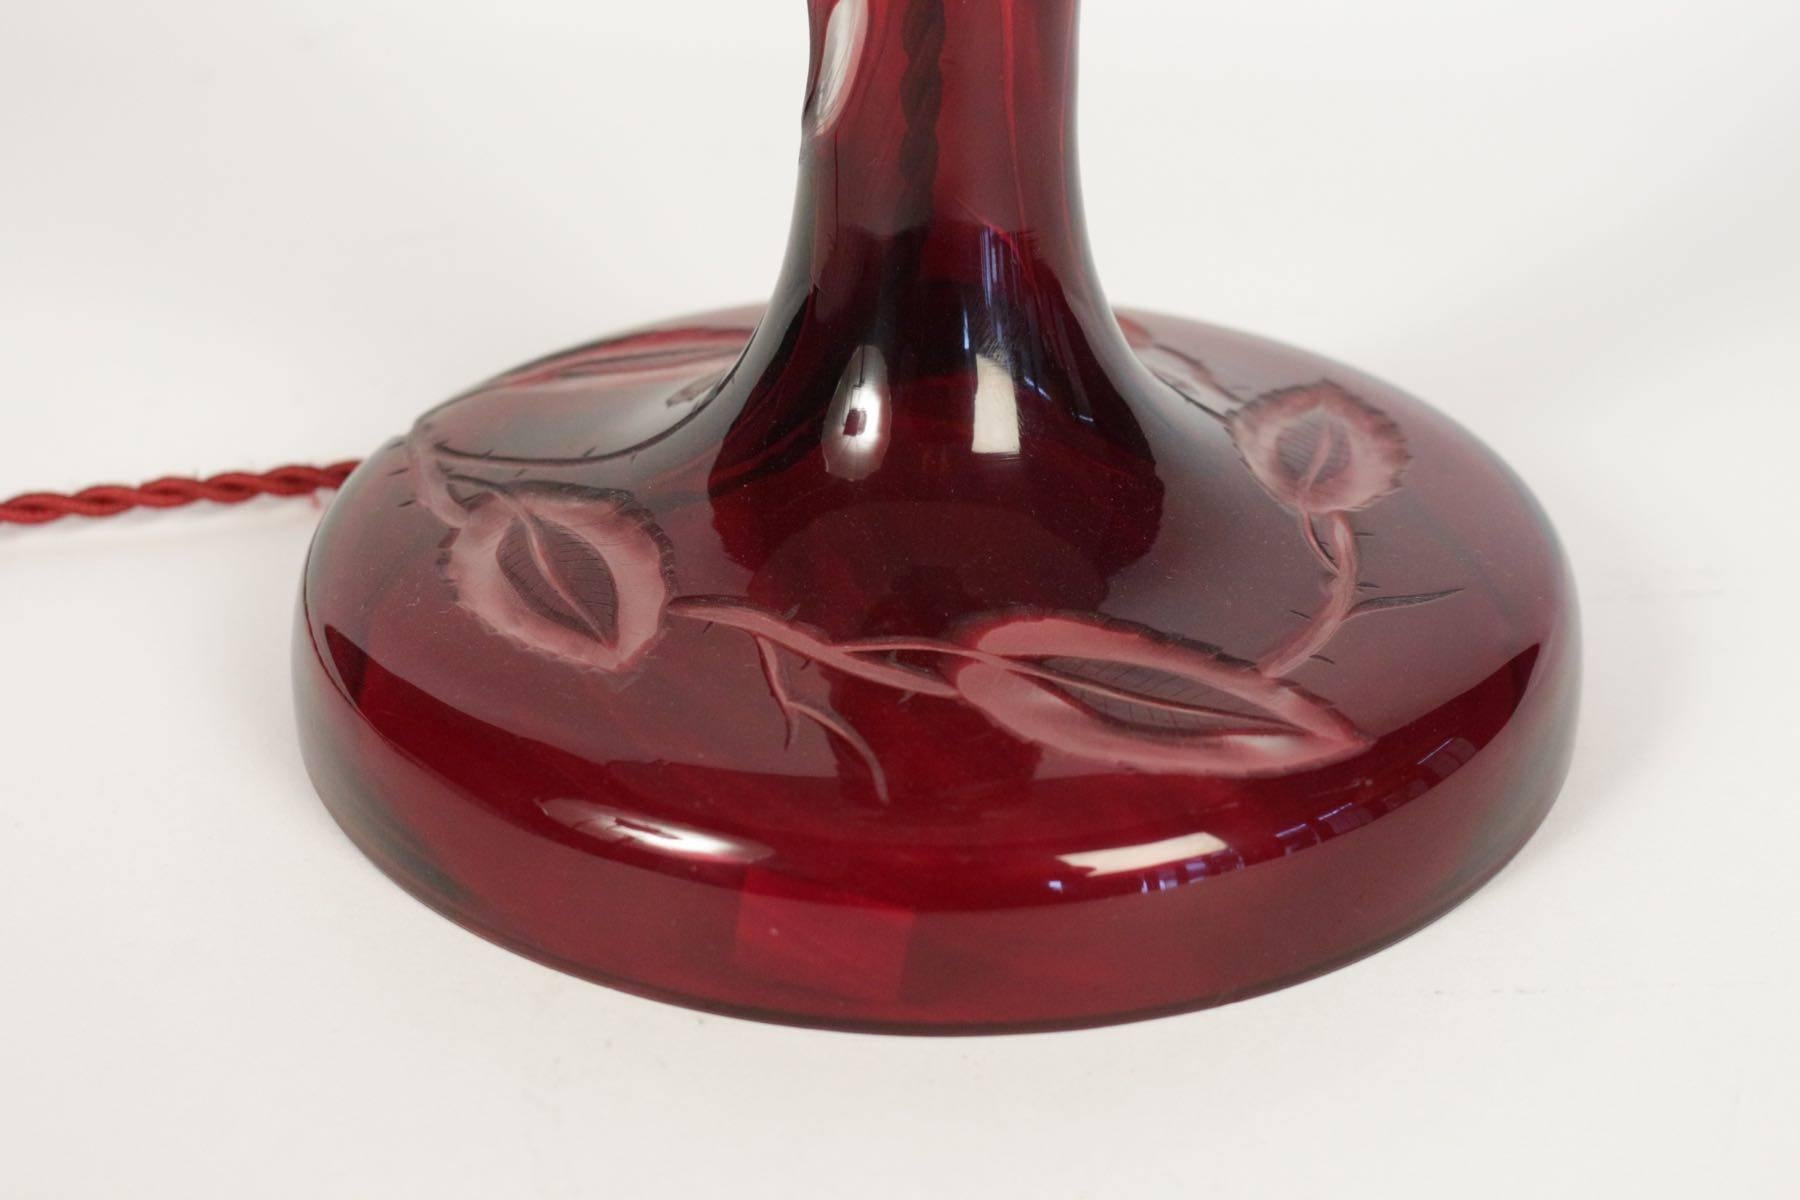 20th Century Beautiful Art Nouveau Table Lamp in Etched Burgundy Colored Glass, circa 1900